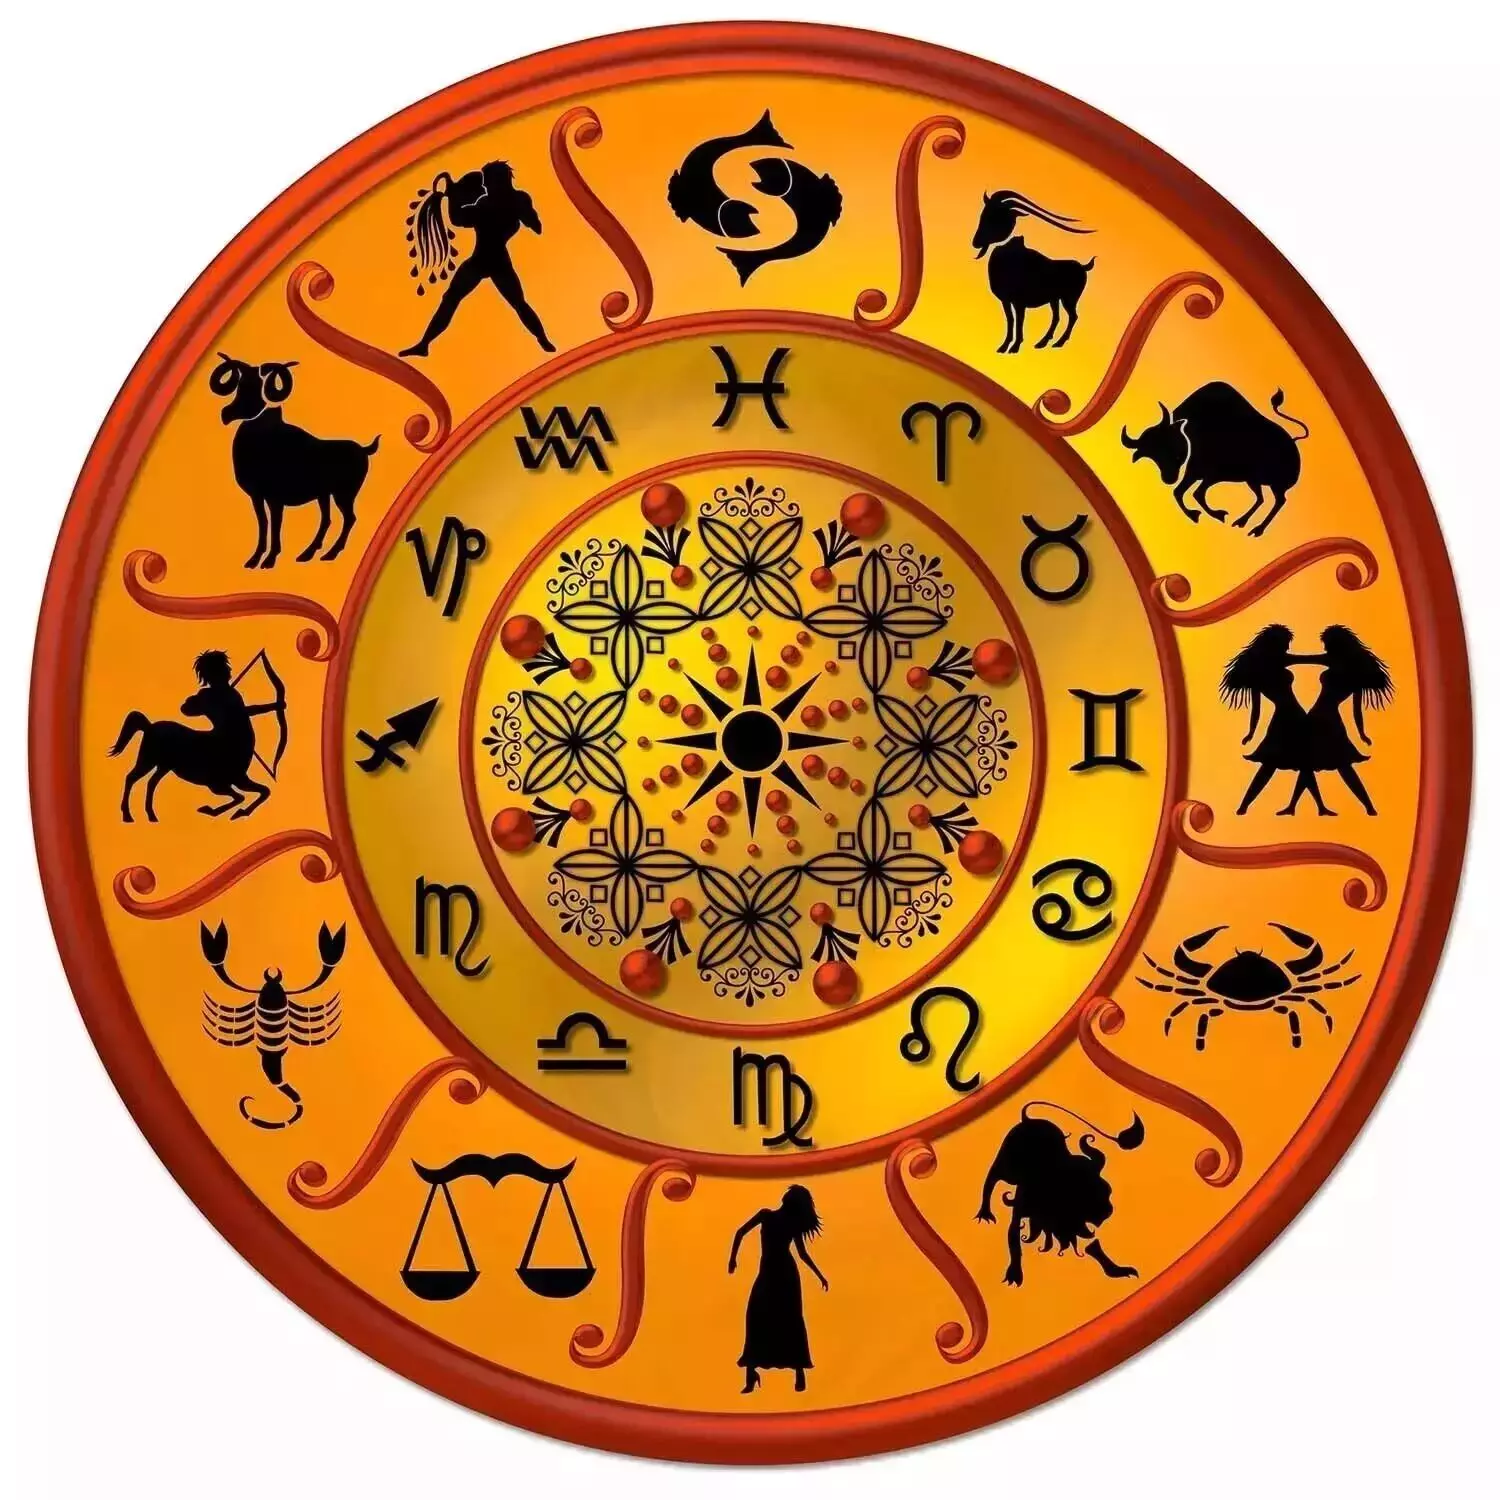 08 February – Know your todays horoscope